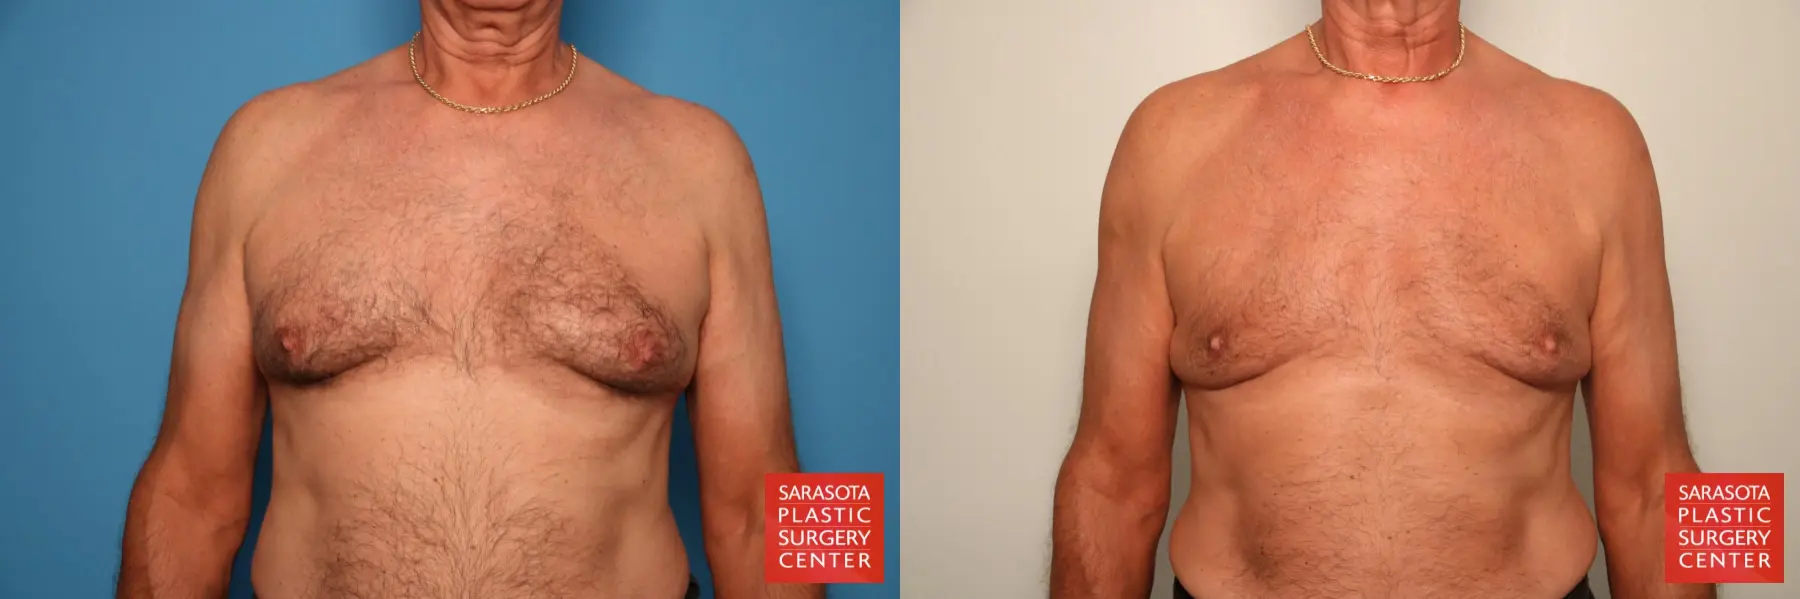 Gynecomastia: Patient 13 - Before and After  